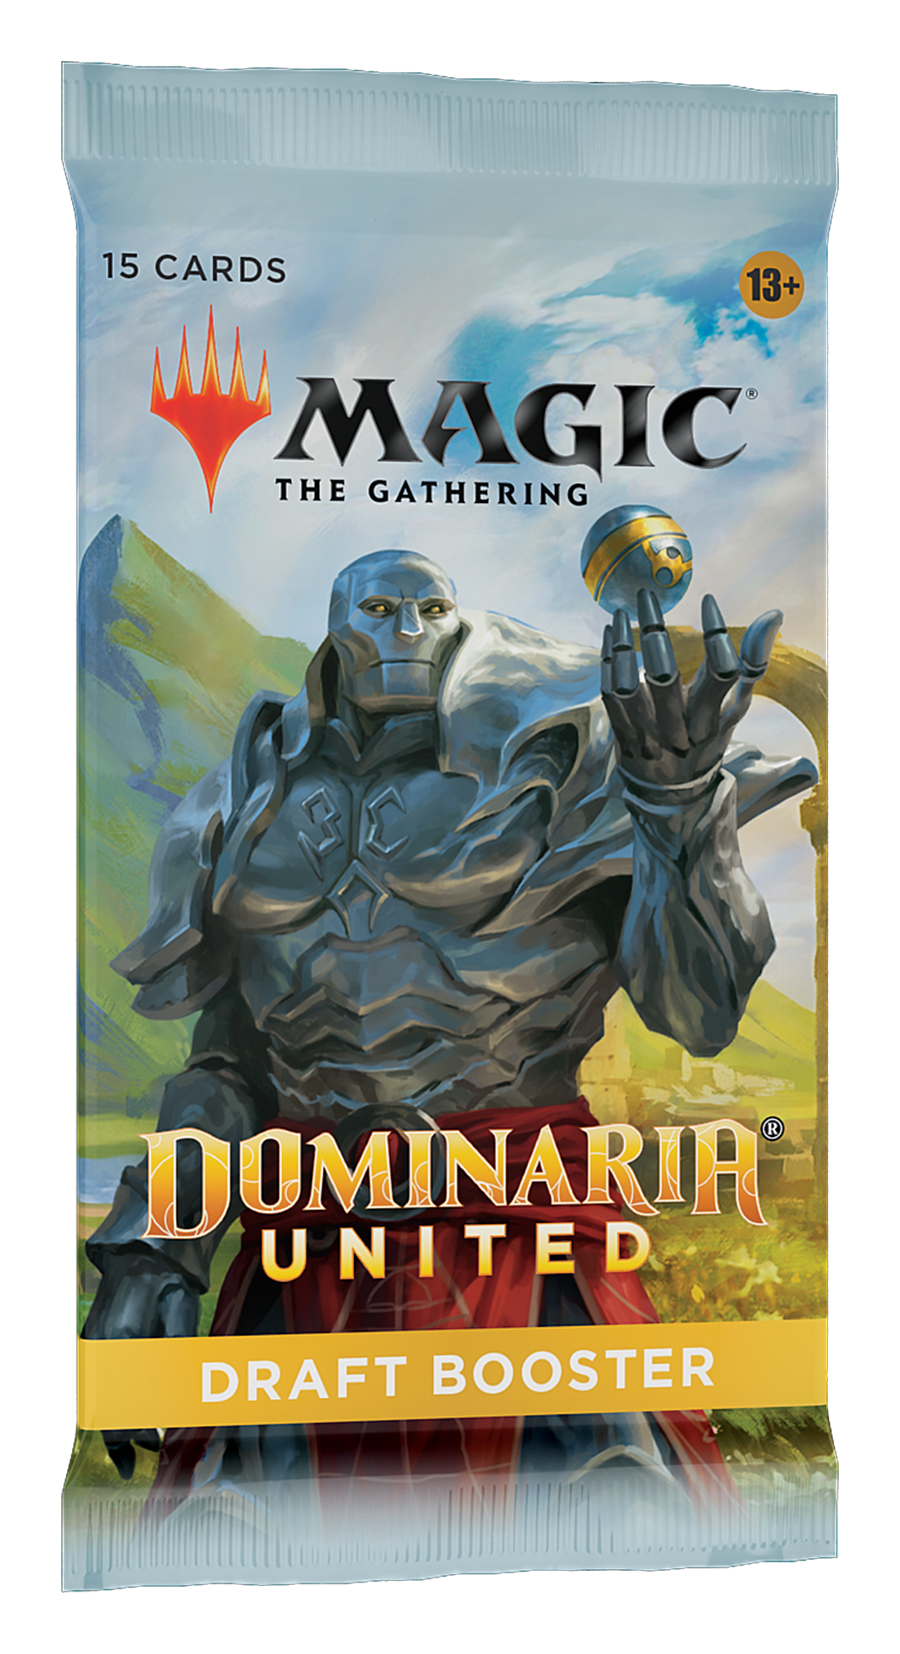 Dominaria United Draft Booster pack